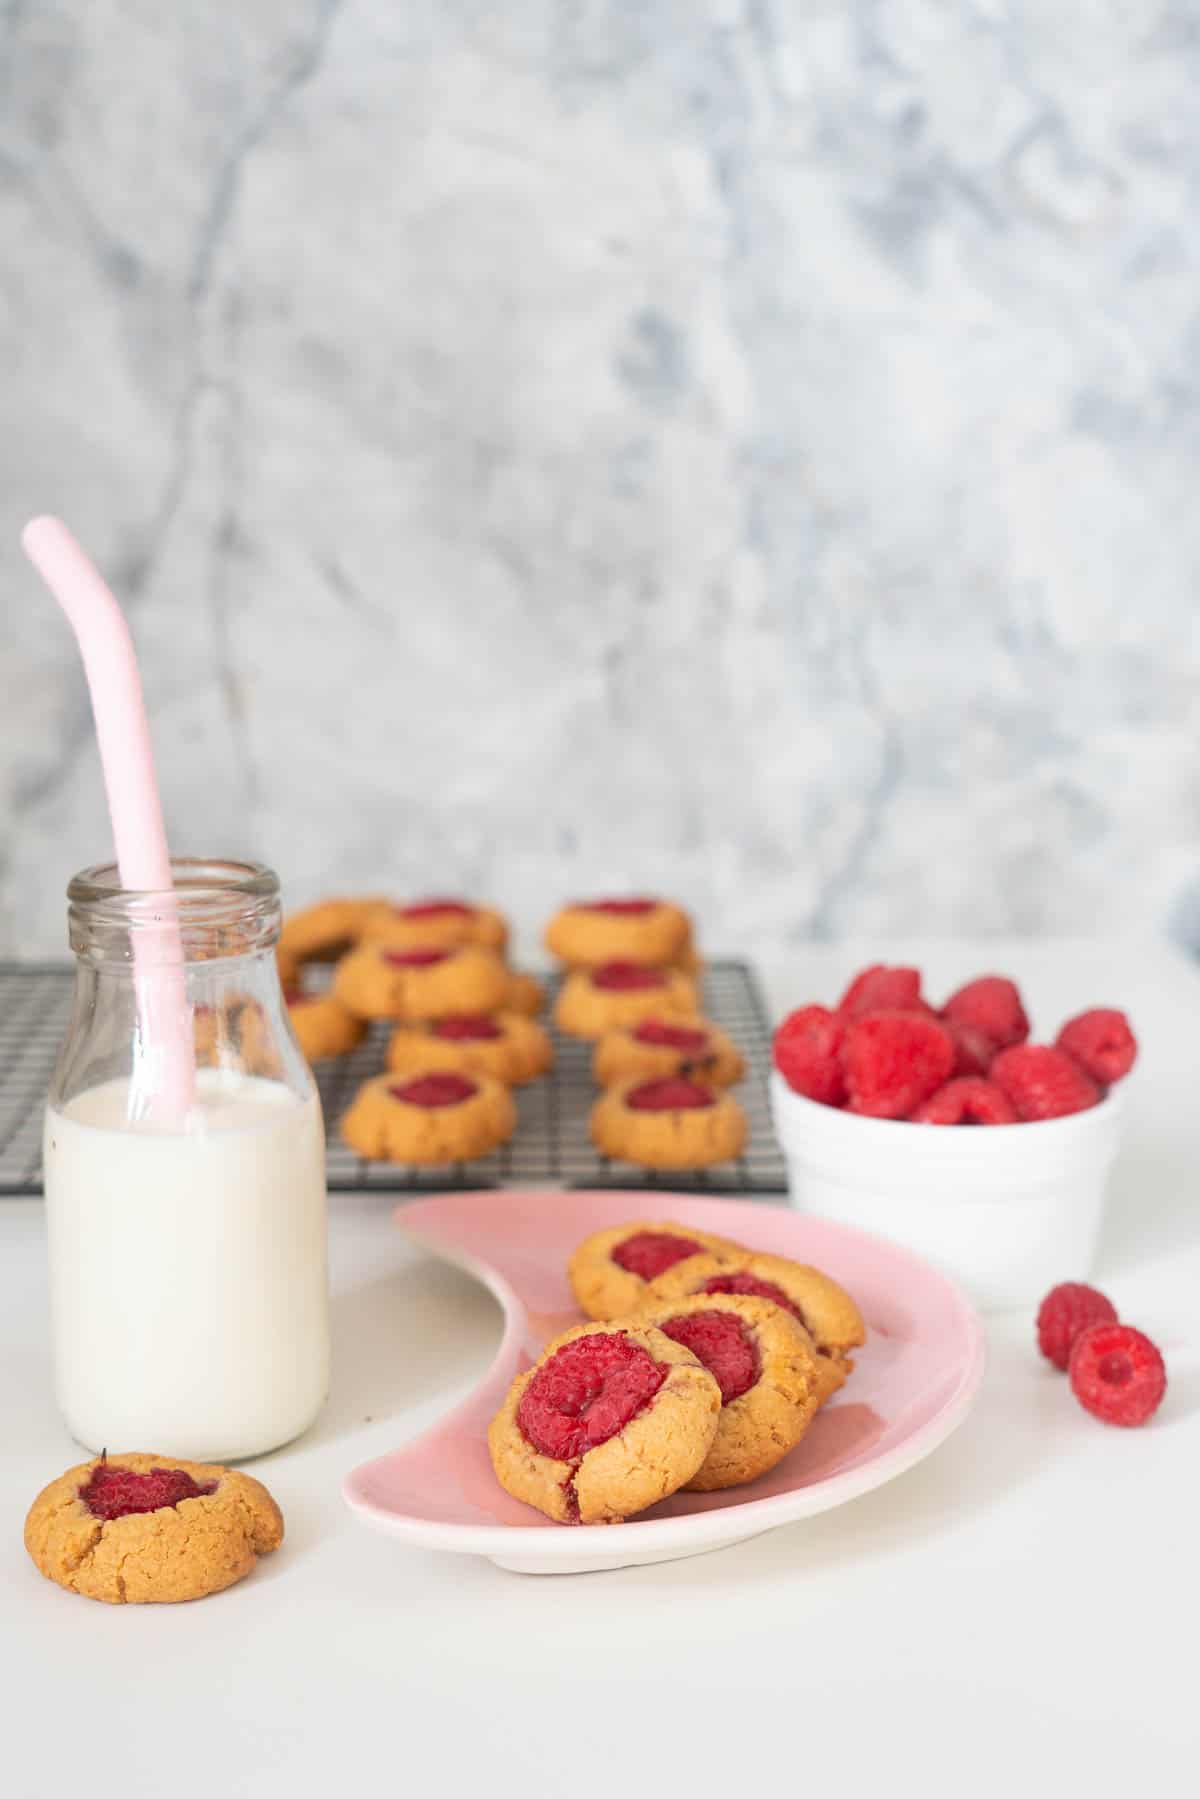 Raspberry thumbprint cookies on a pink plate with a small bottle of milk with a straw.